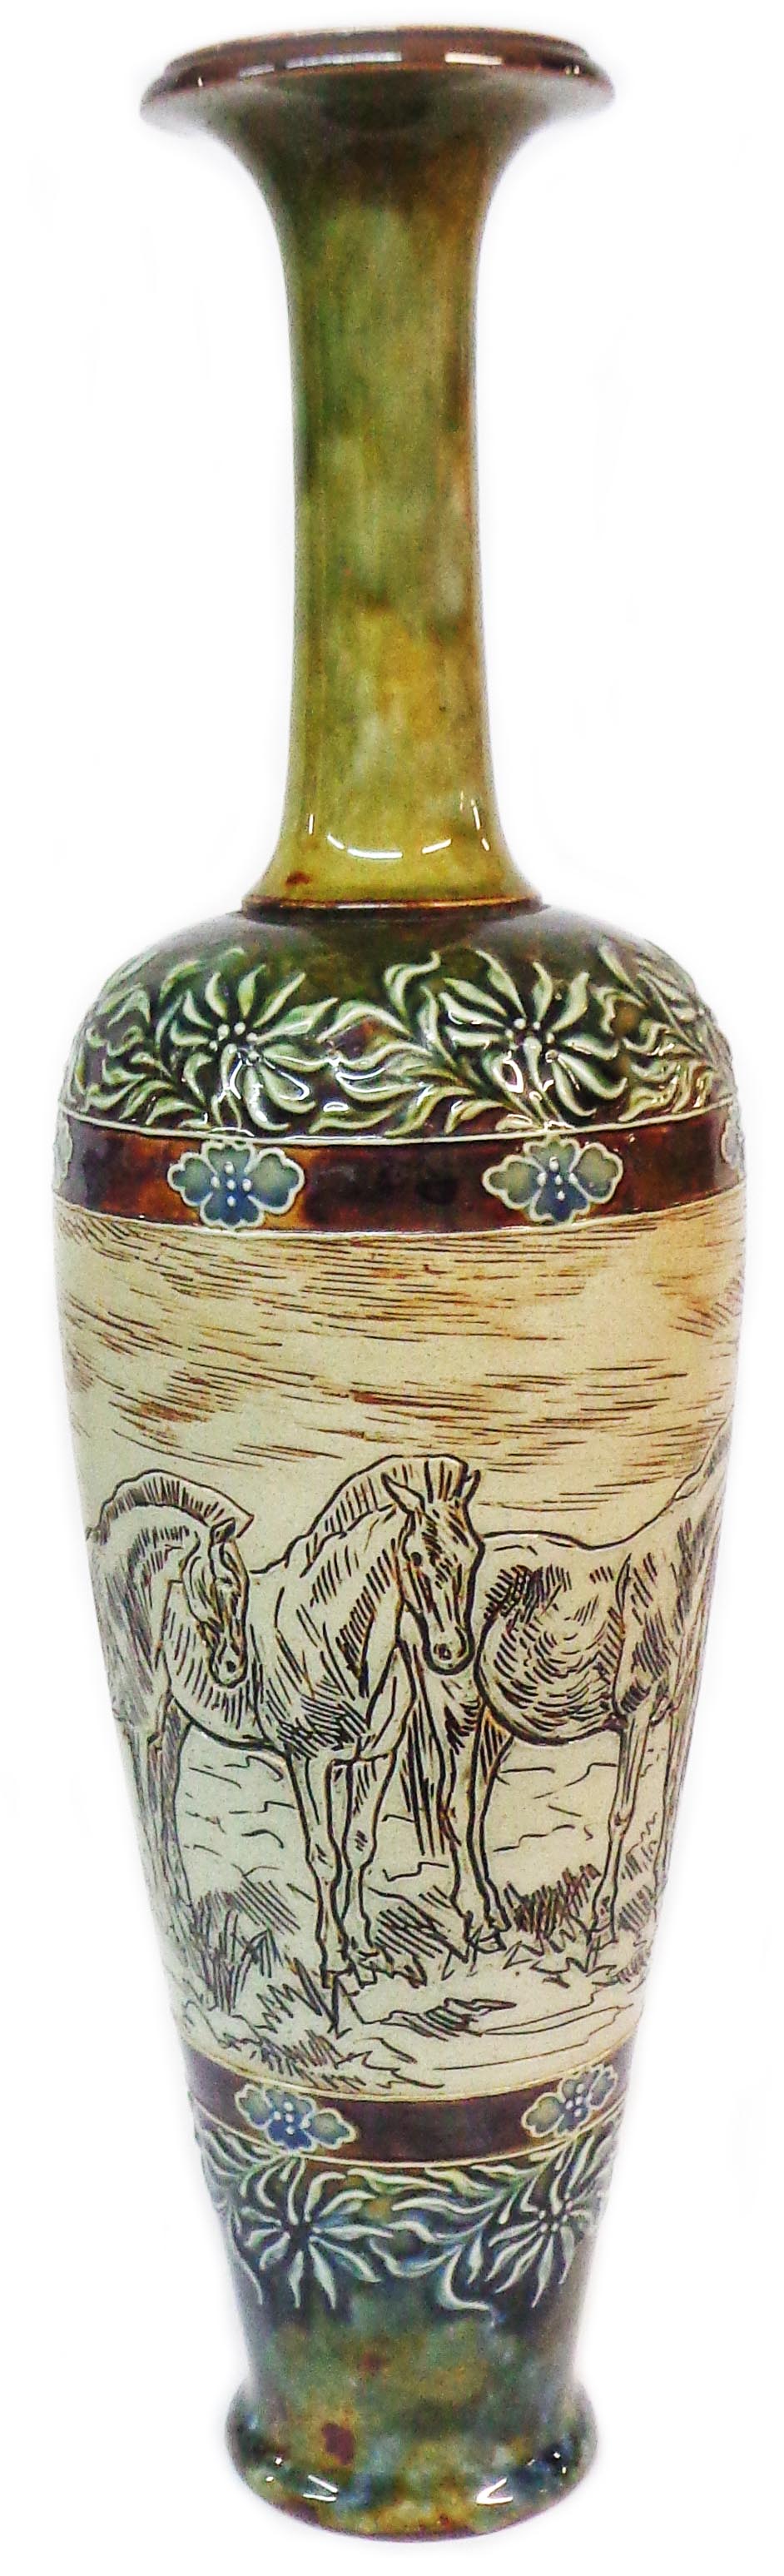 A Doulton Lambeth slender bulbous vase with incised horse group decoration by Hannah Barlow -